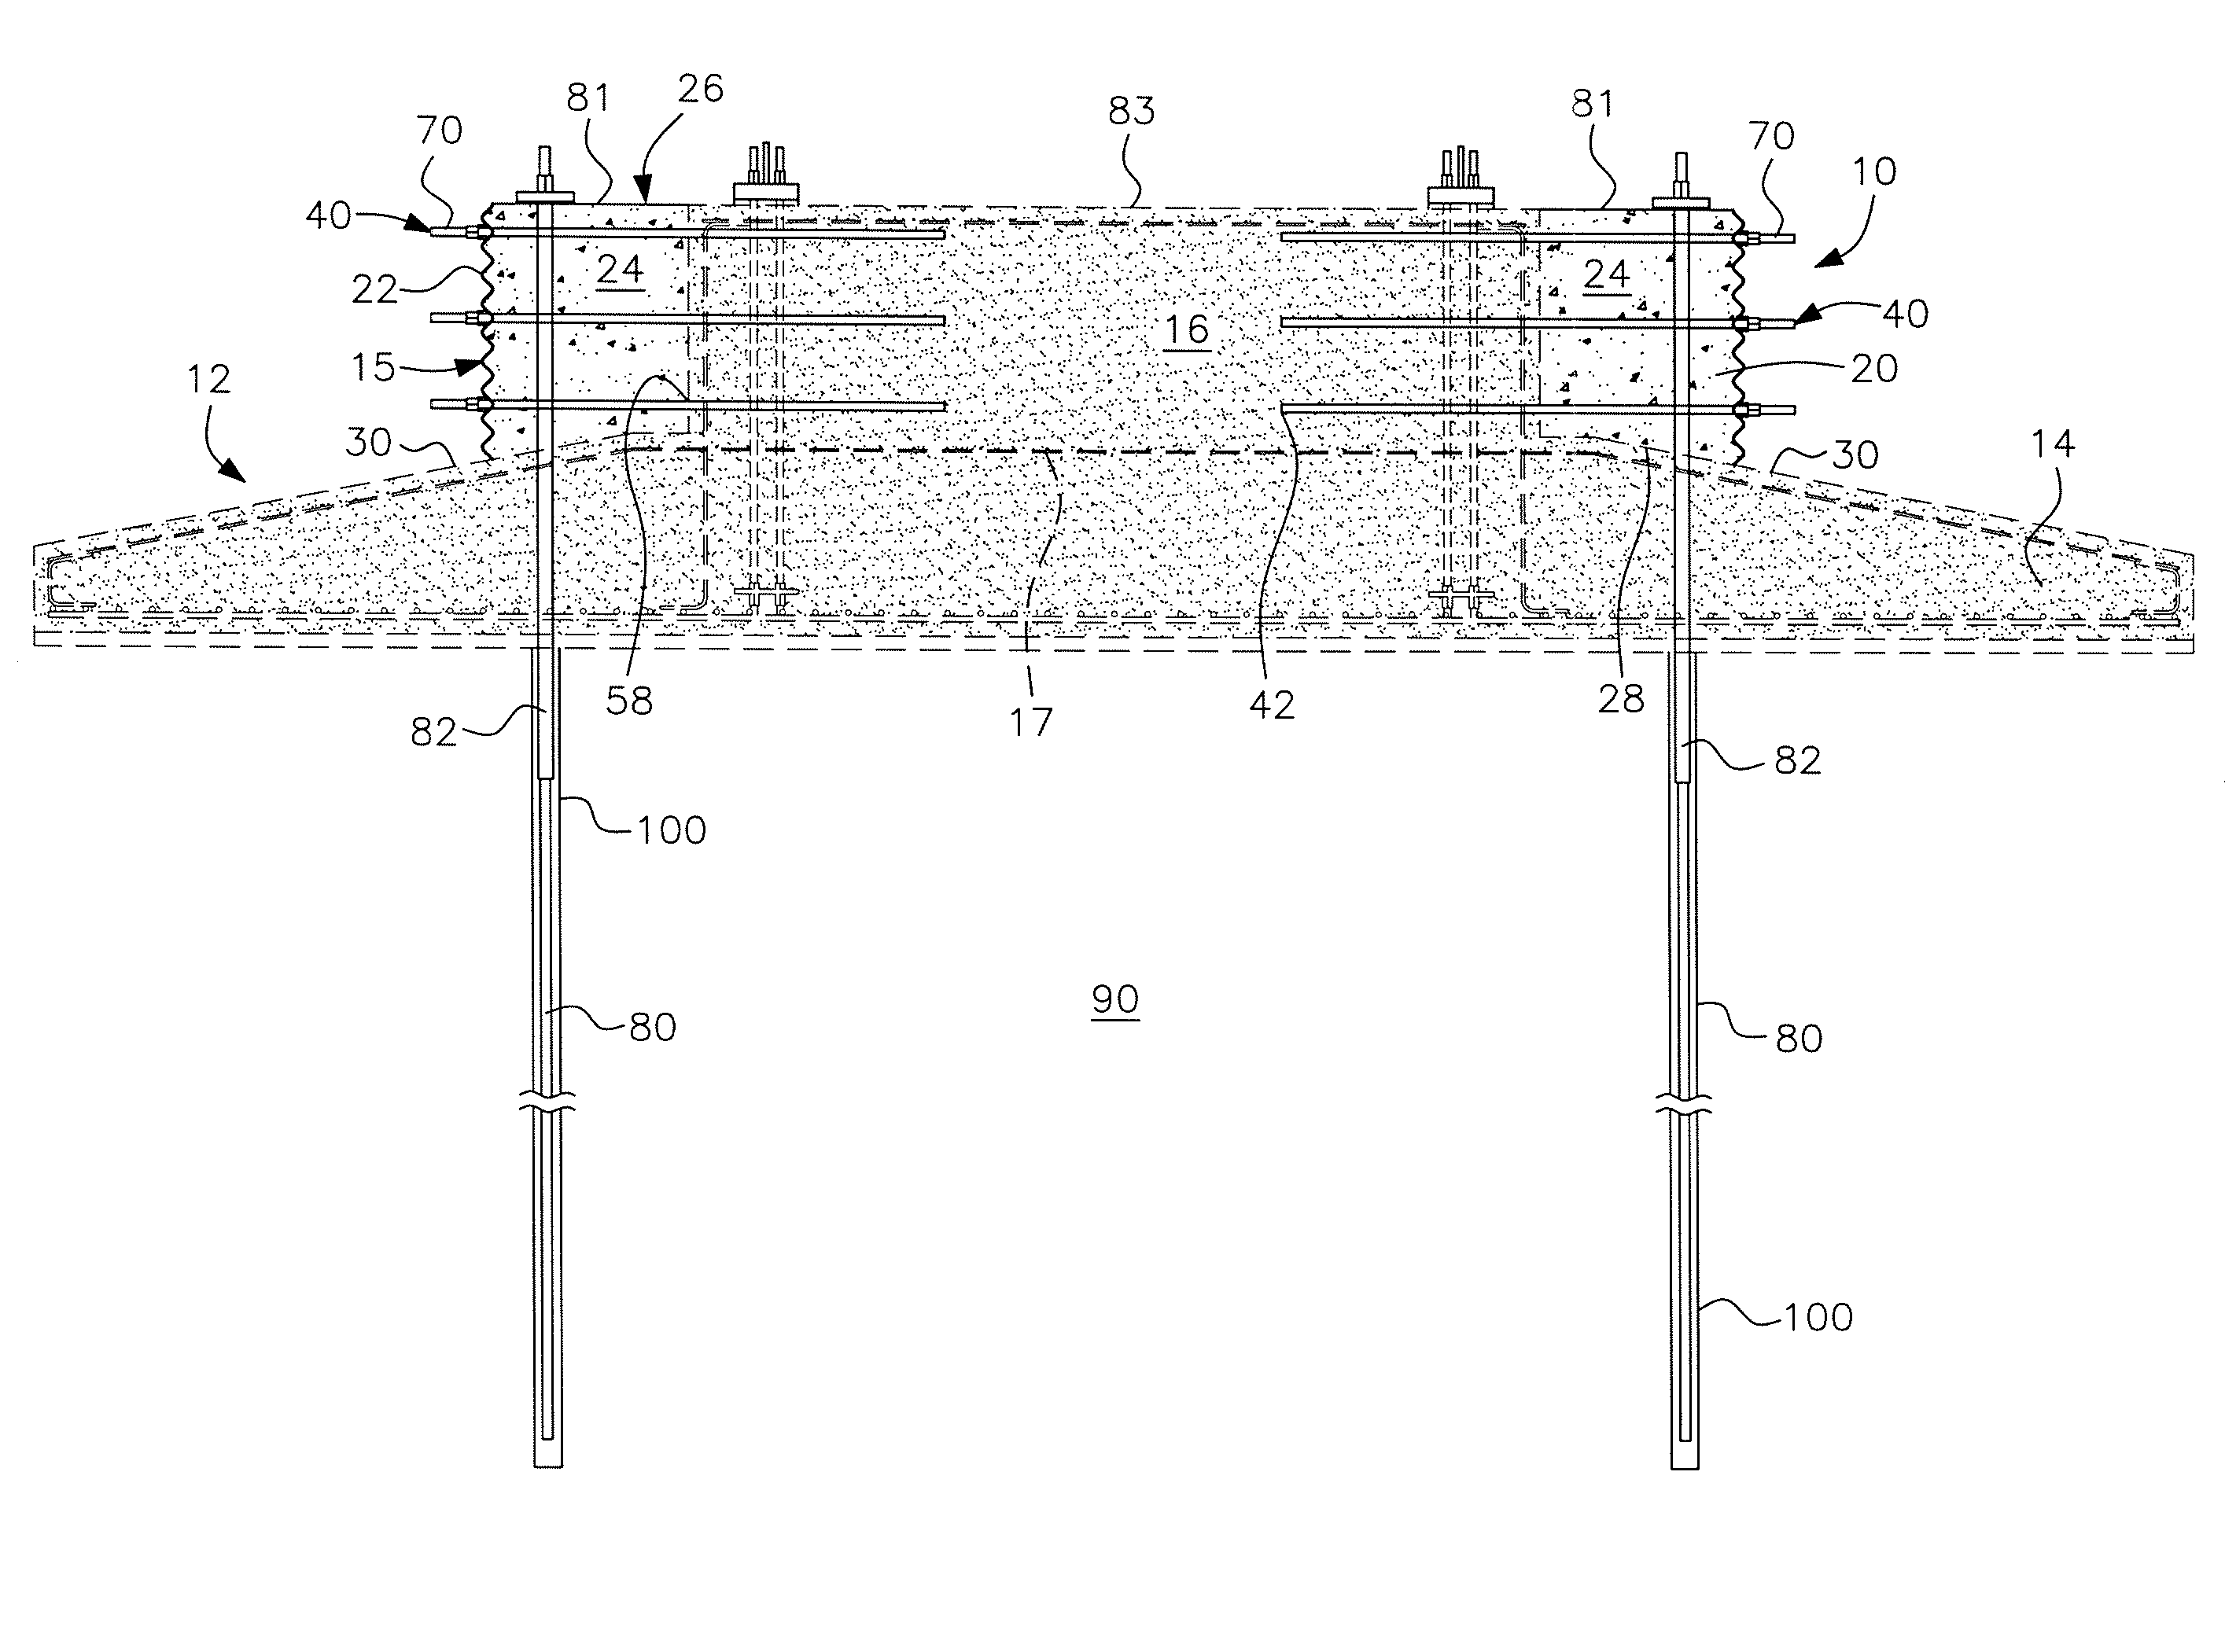 Retrofit reinforcing structure addition and method for wind turbine concrete gravity spread foundations and the like